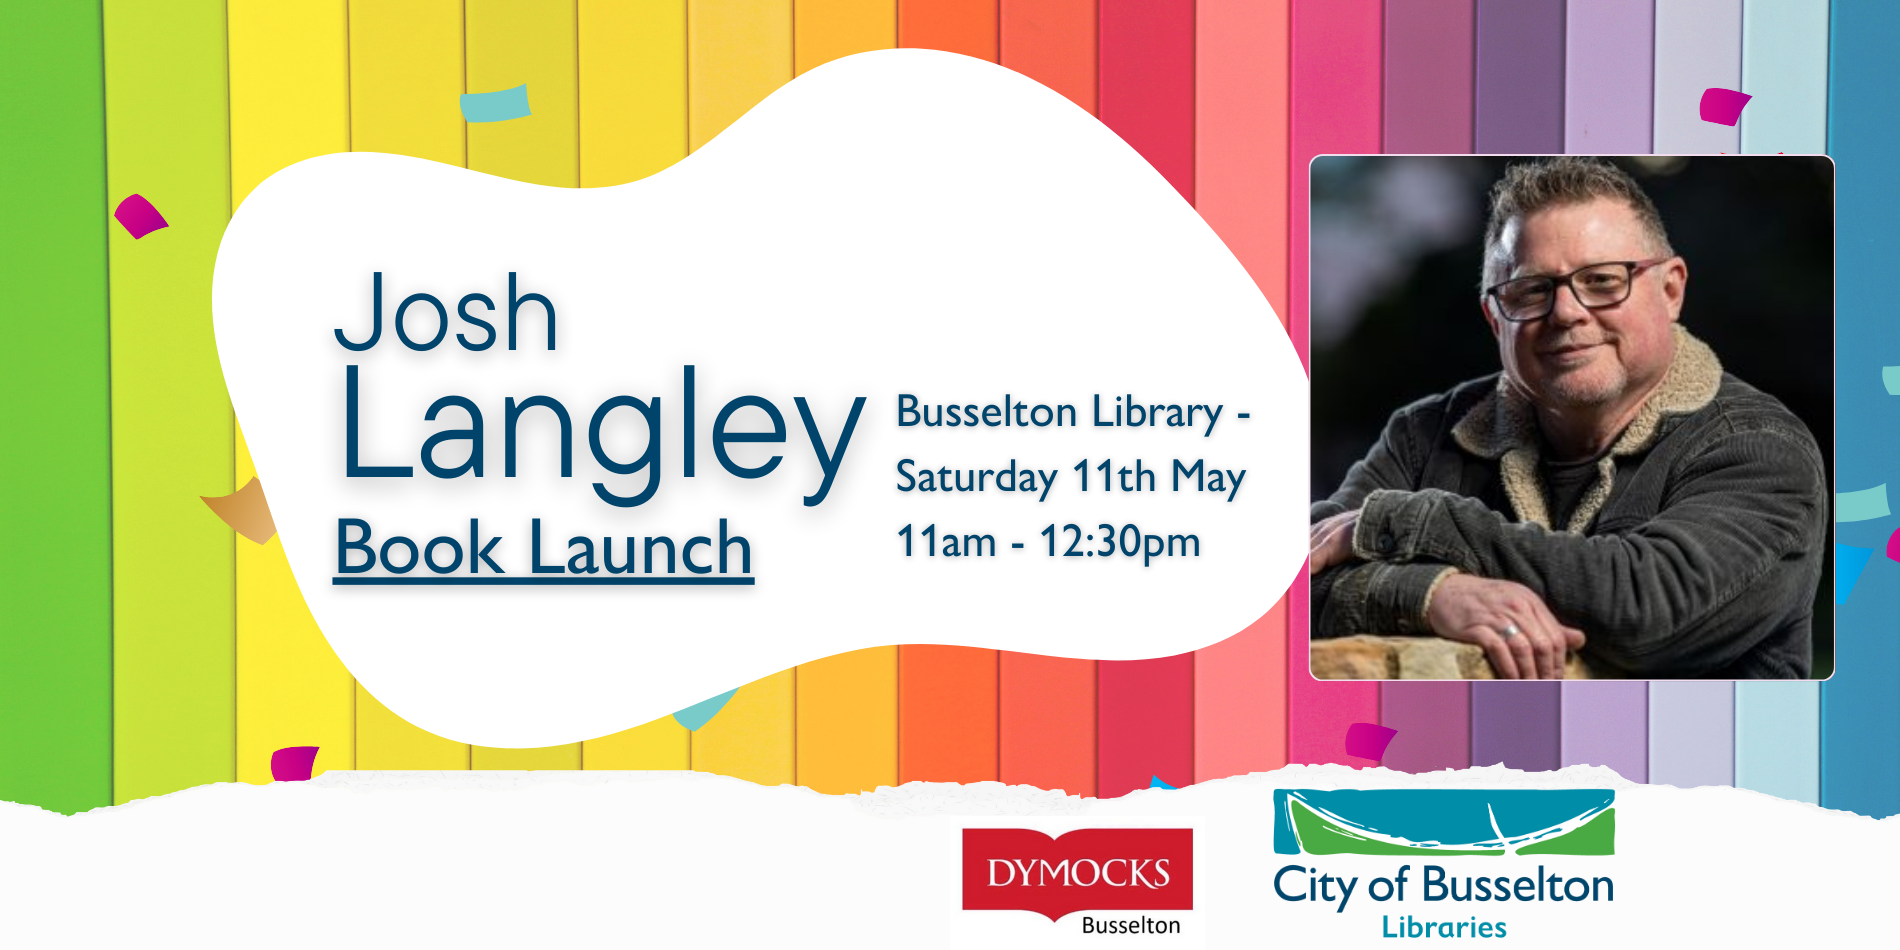 Josh Langley Book Launch at the Busselton Library on May the 11th, 11am to 12:30pm.